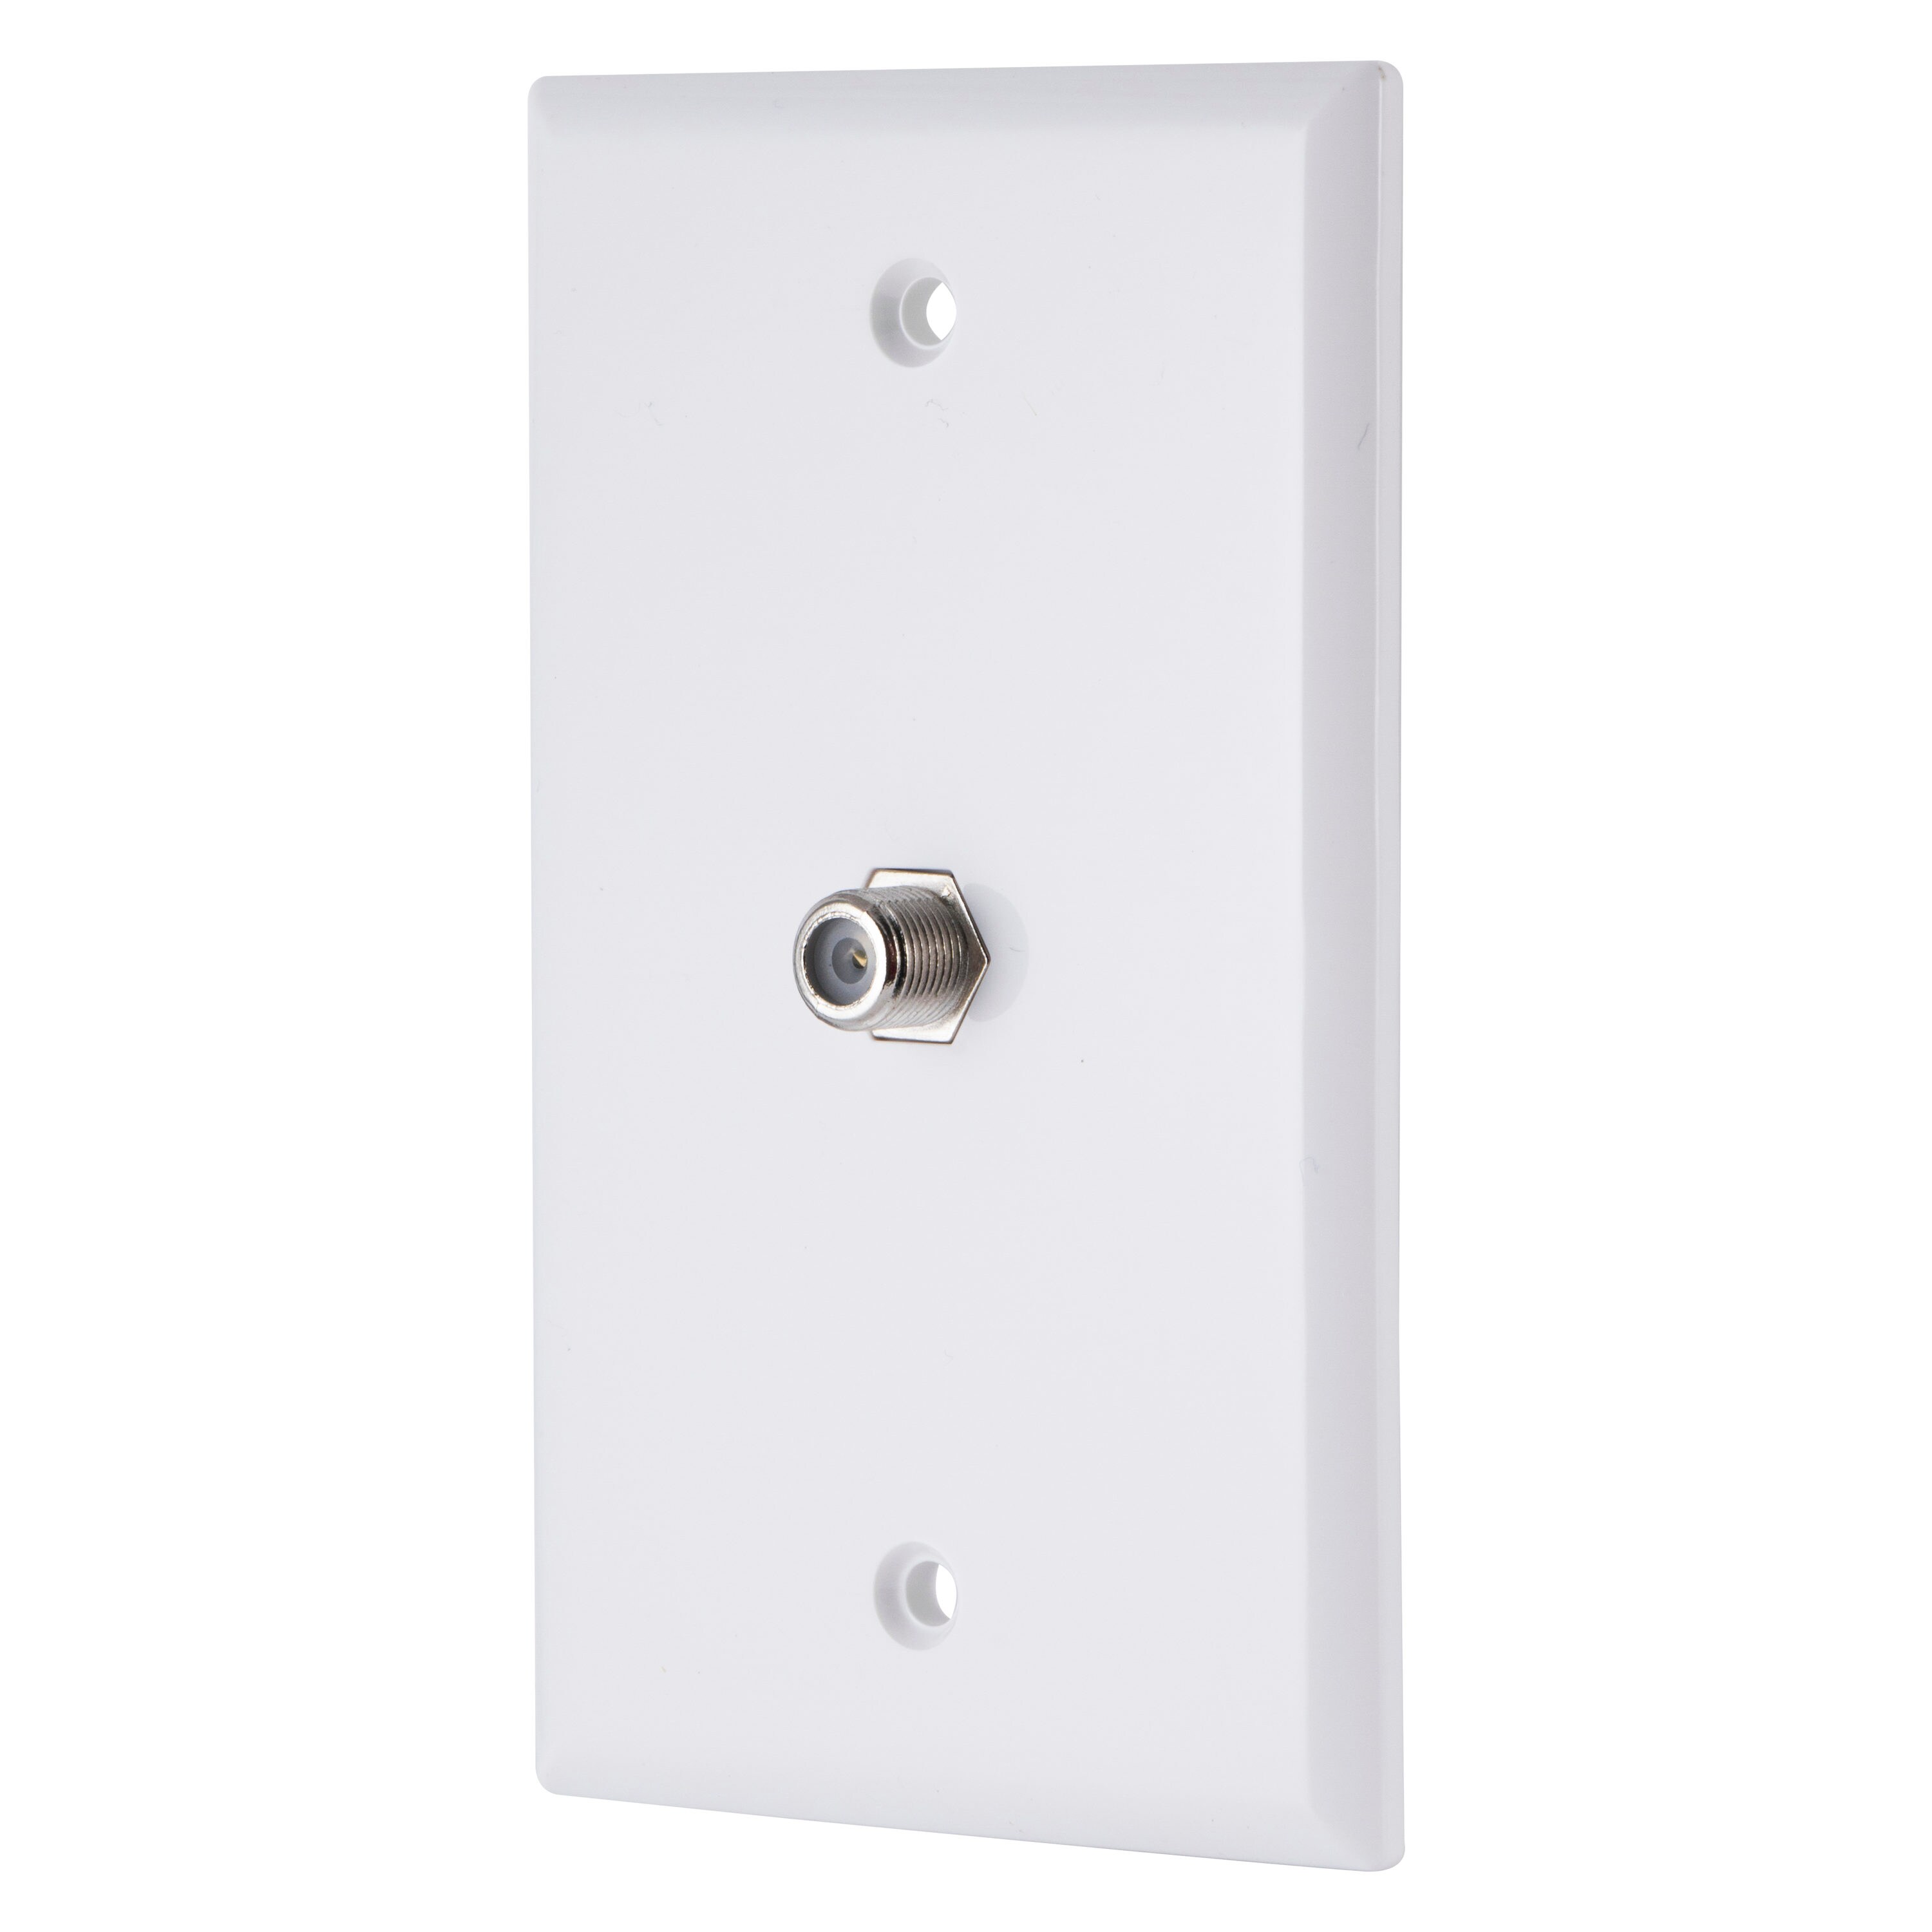 Ge Decorator Wall Plate Gold Plated Steel Light Switch Cover 